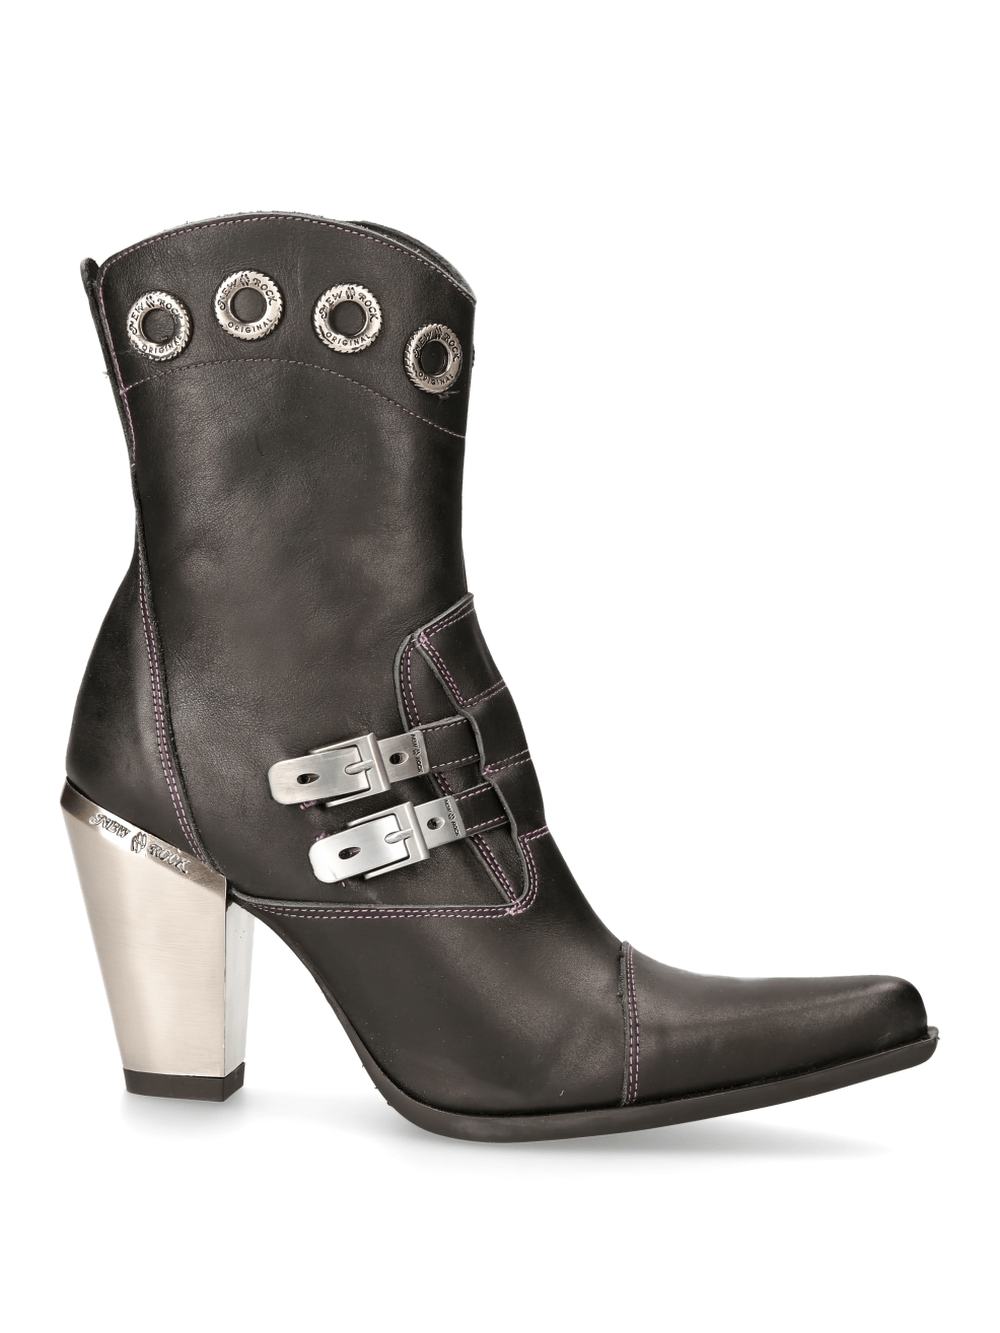 NEW ROCK Embellished Black Ankle Boots with Silver Buckle